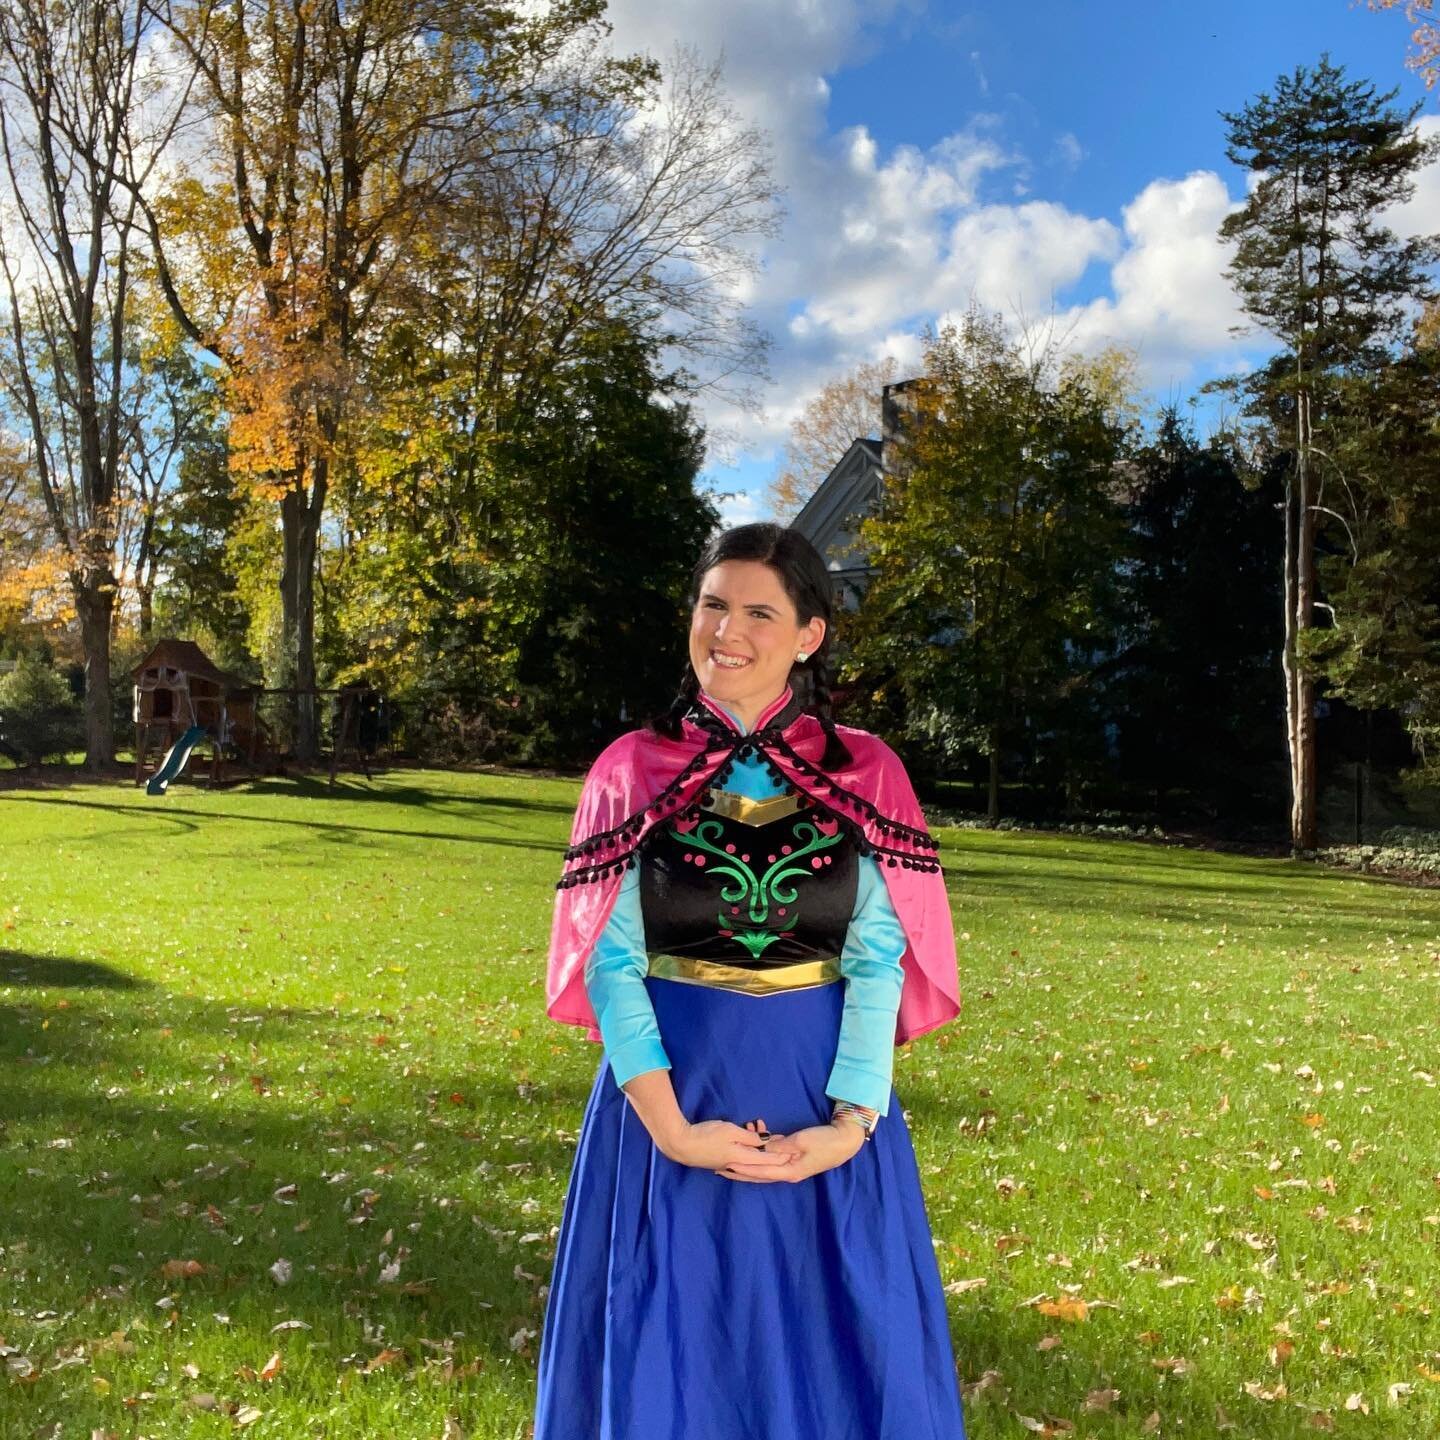 I was very happy to indulge my kid&rsquo;s request that I dress up as Anna this year because I&rsquo;m pretty sure if Frozen had existed when we were kids, Anna would have been the princess I related to the most. This is because she:
❄️is unapologeti